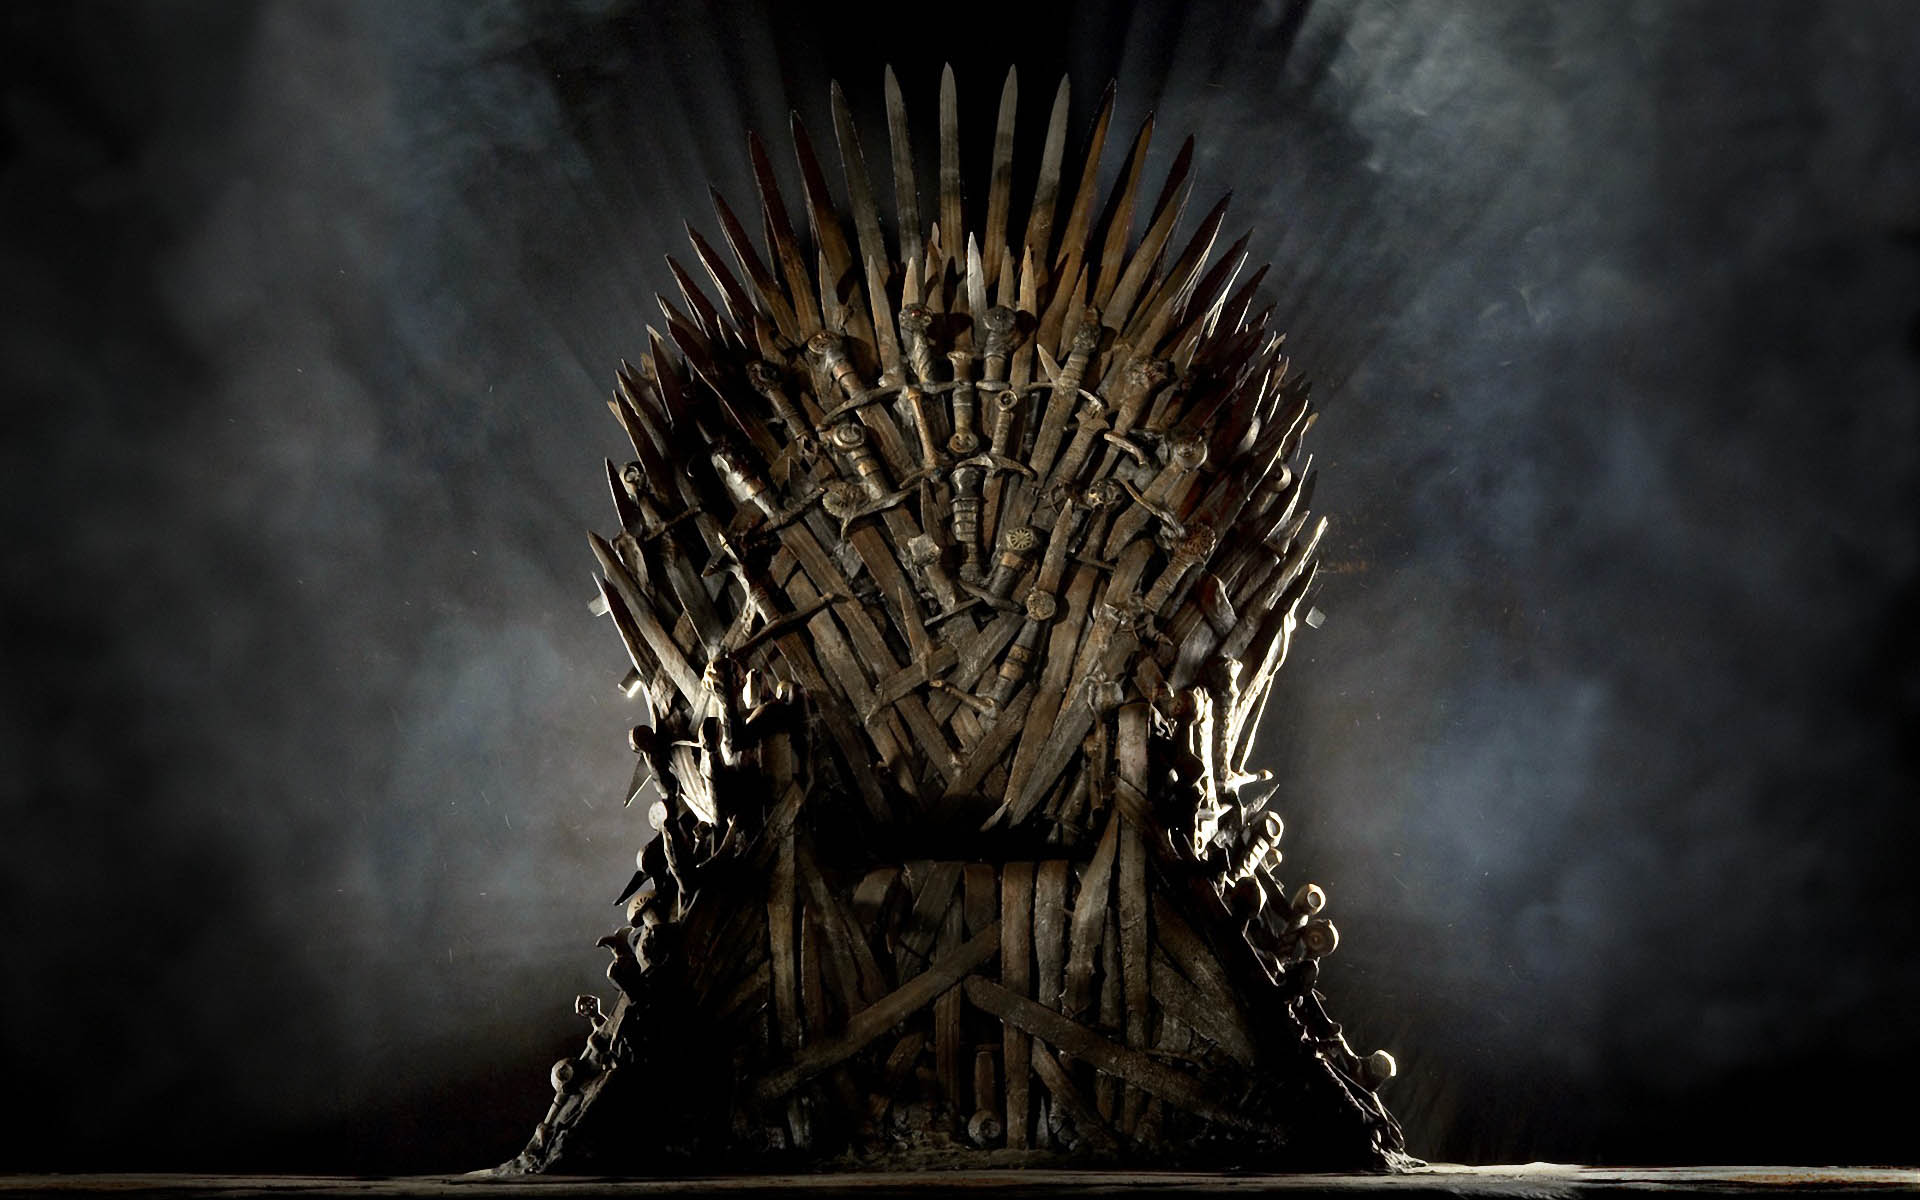 Voicy sounds blog on Game of Thrones – TOP 5 Quotes